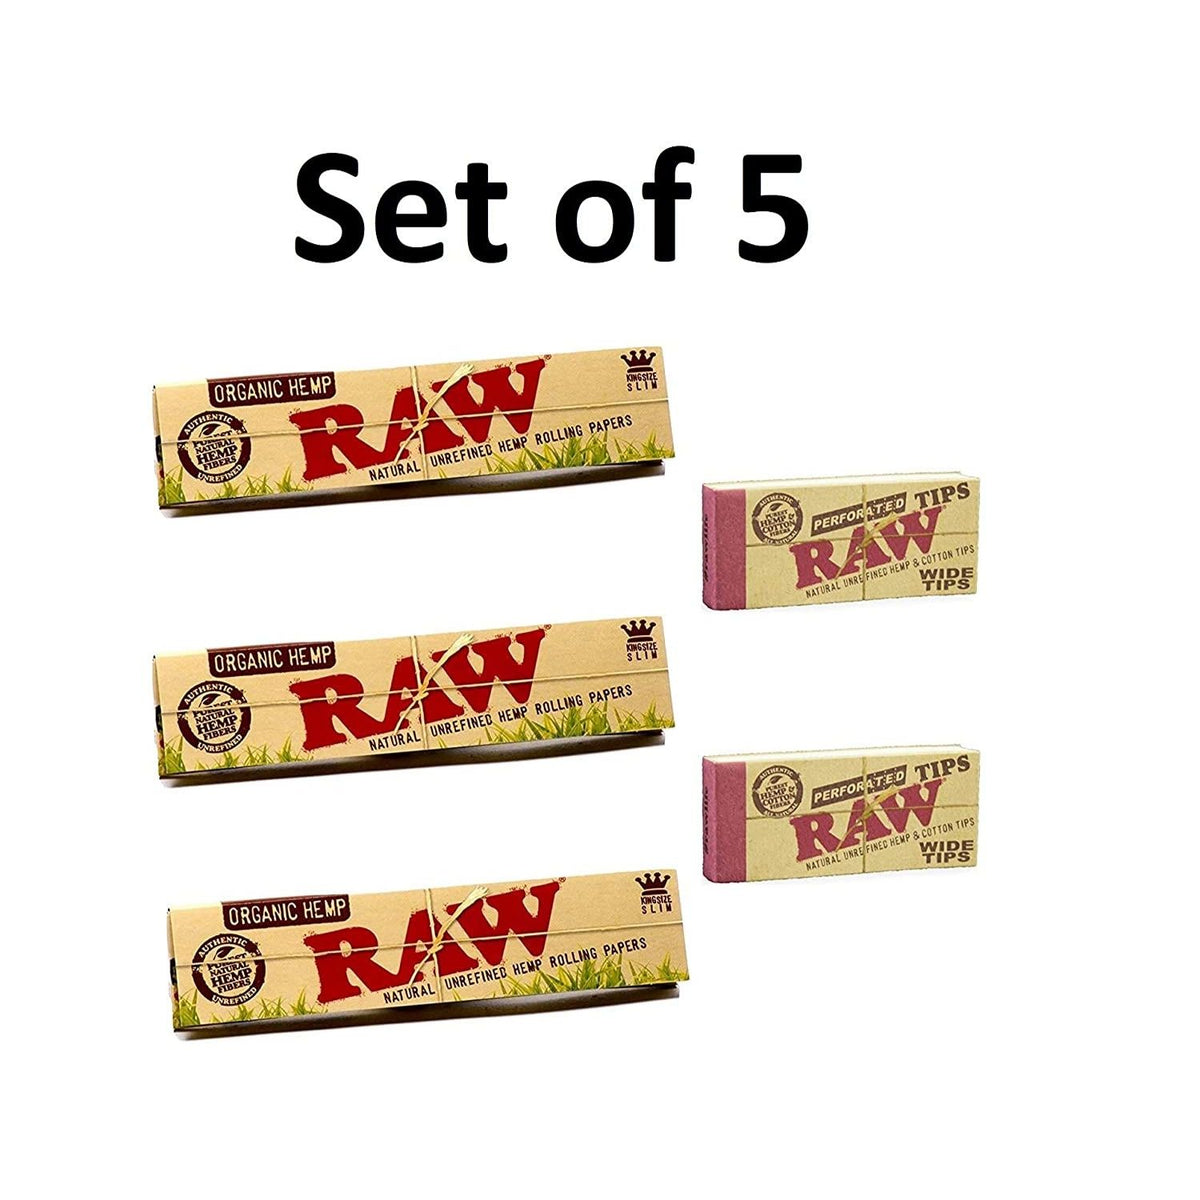 RAW Organic Rolling Paper with RAW Wide Perforated Tips - Set of 5